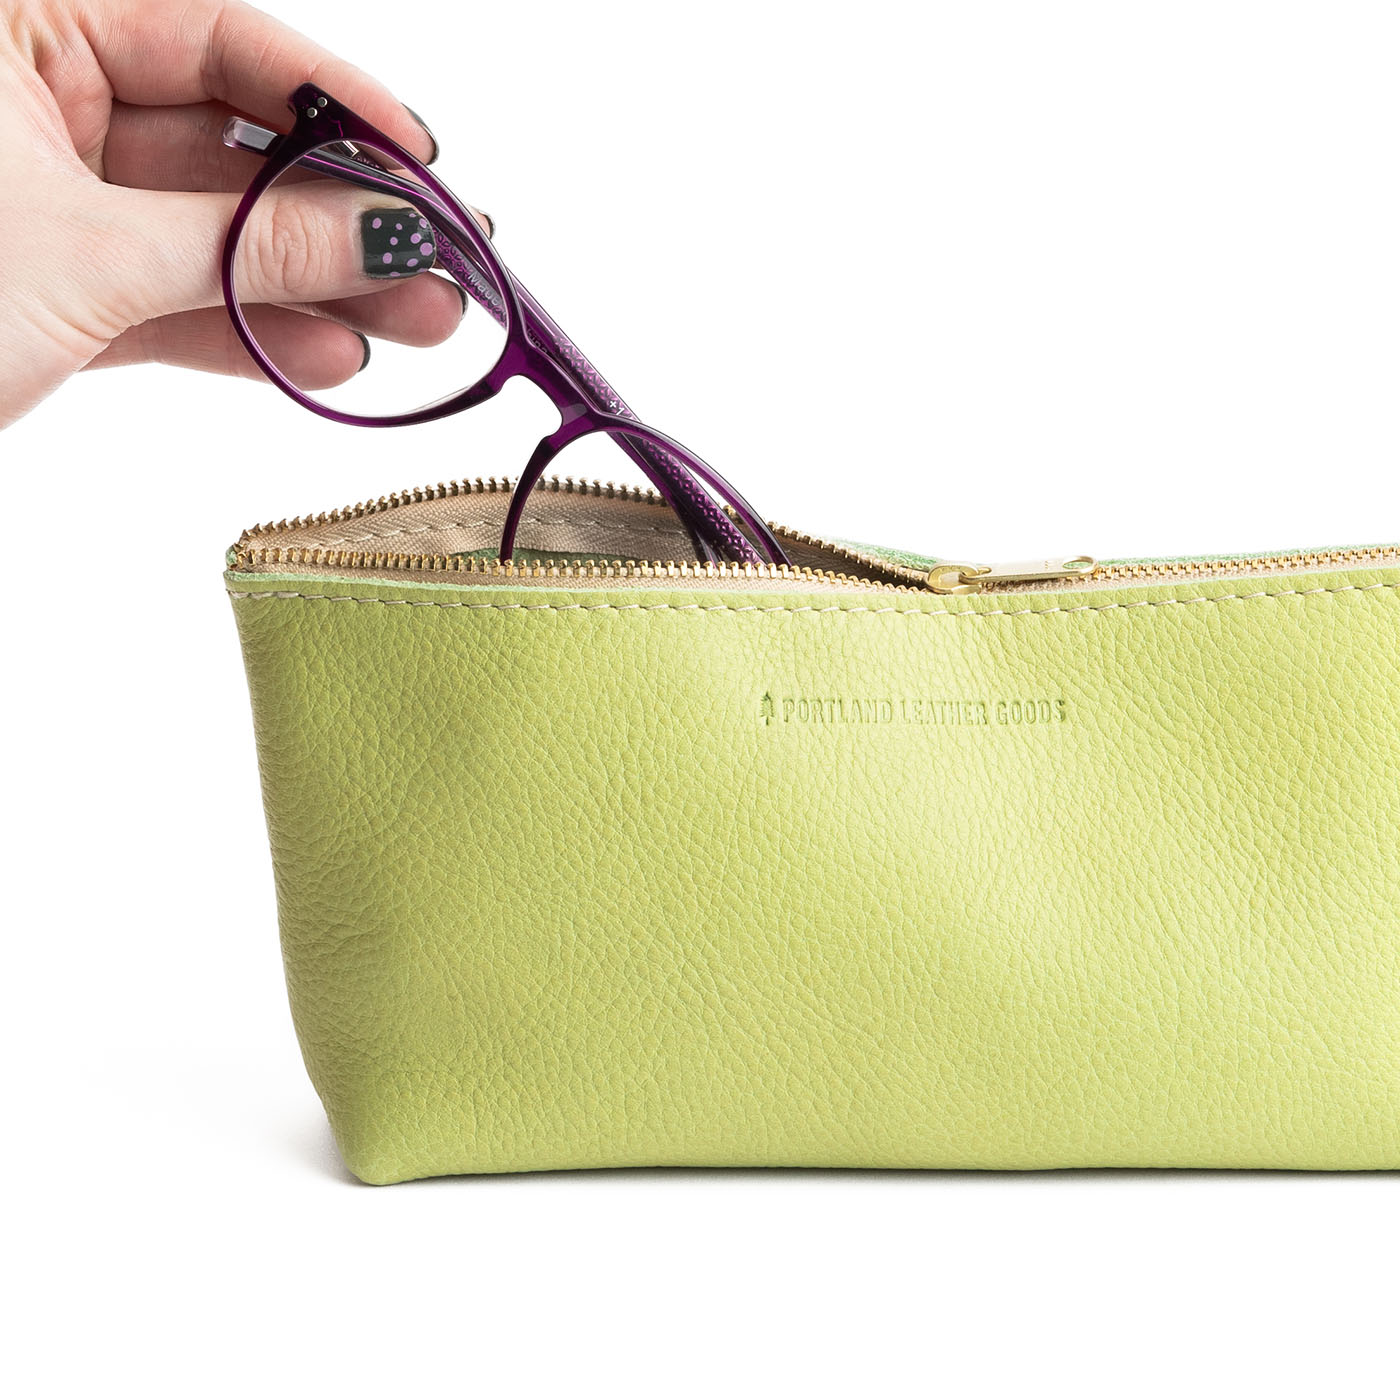 All Color: Sugar Snap | Leather utility bag pouch with top zipper